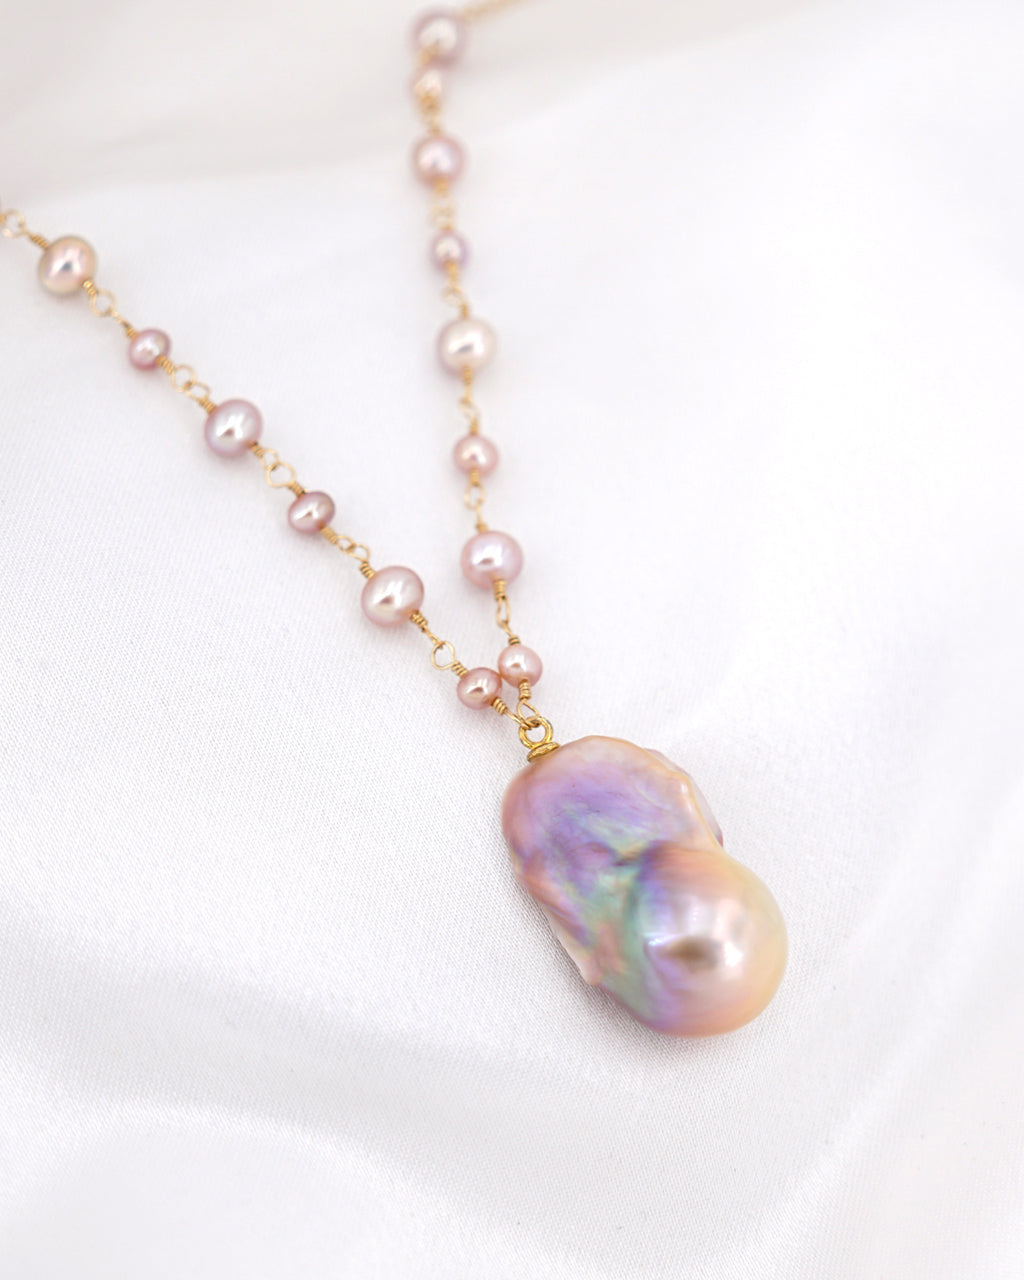 Purple Baroque Pearl Necklace - Wedding Bridal Jewelry for Brides and Bridesmaids | Singapore